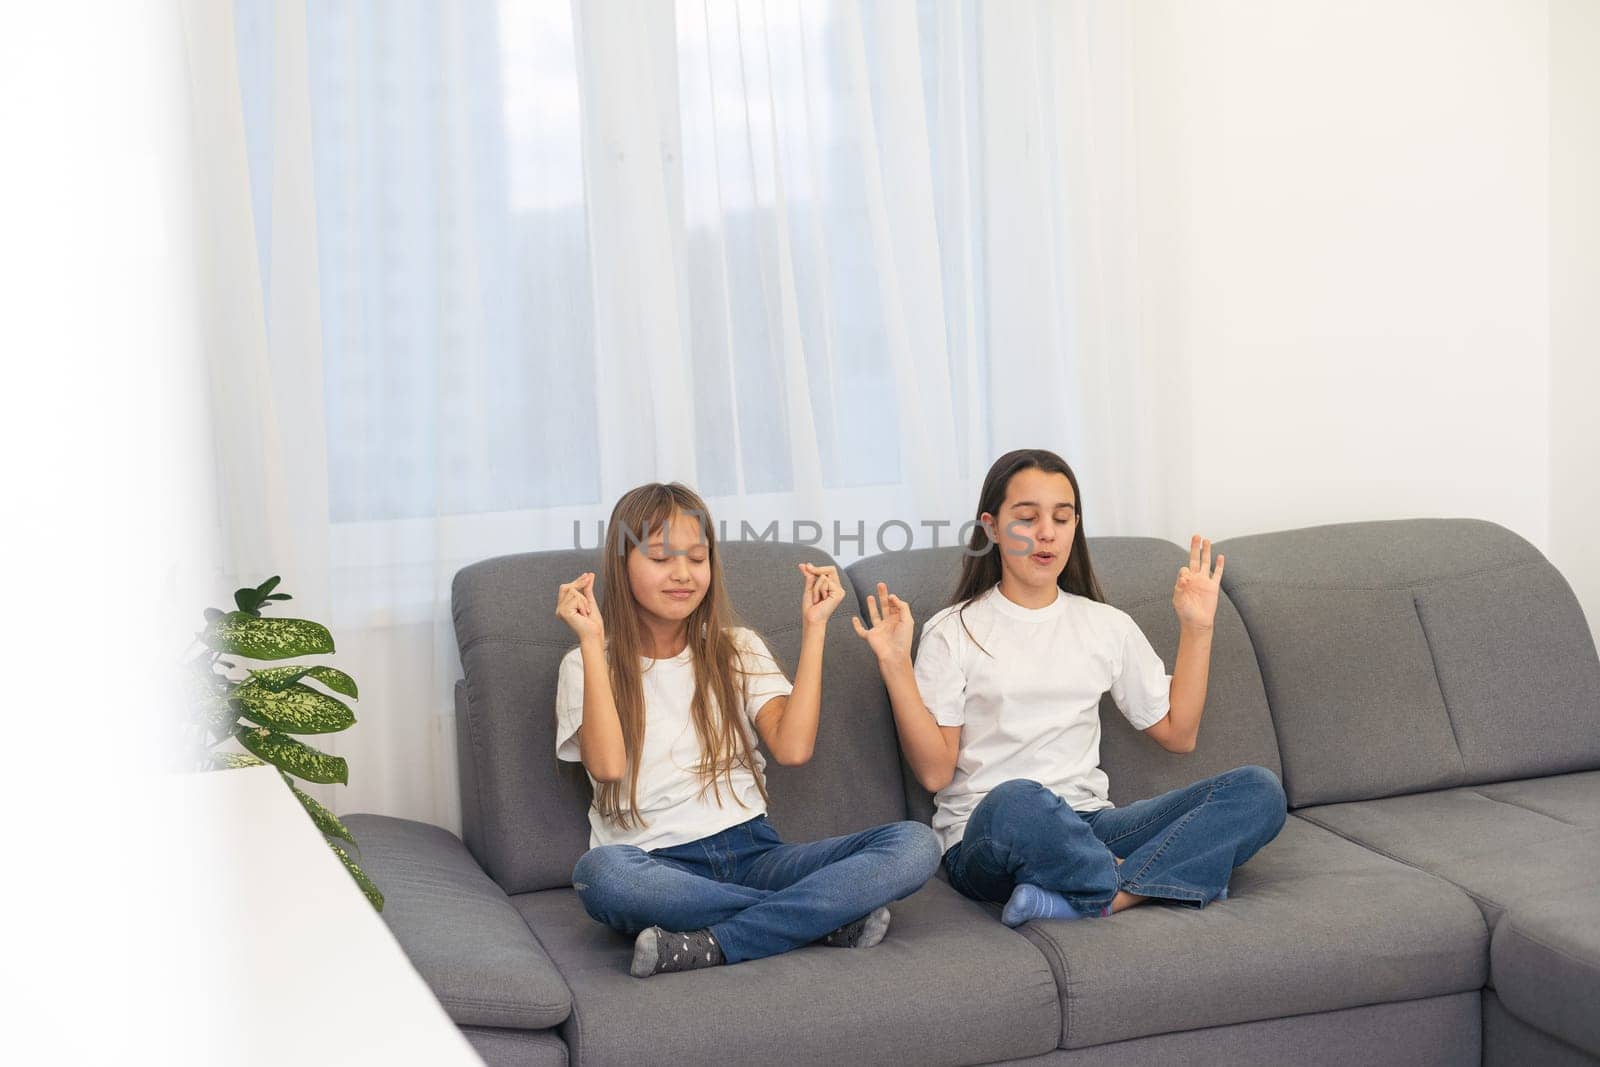 People, relationships, family, relaxation, yoga and meditation concept. girls sitting on bed, looking up, making mudra gesture, praying or meditating by Andelov13